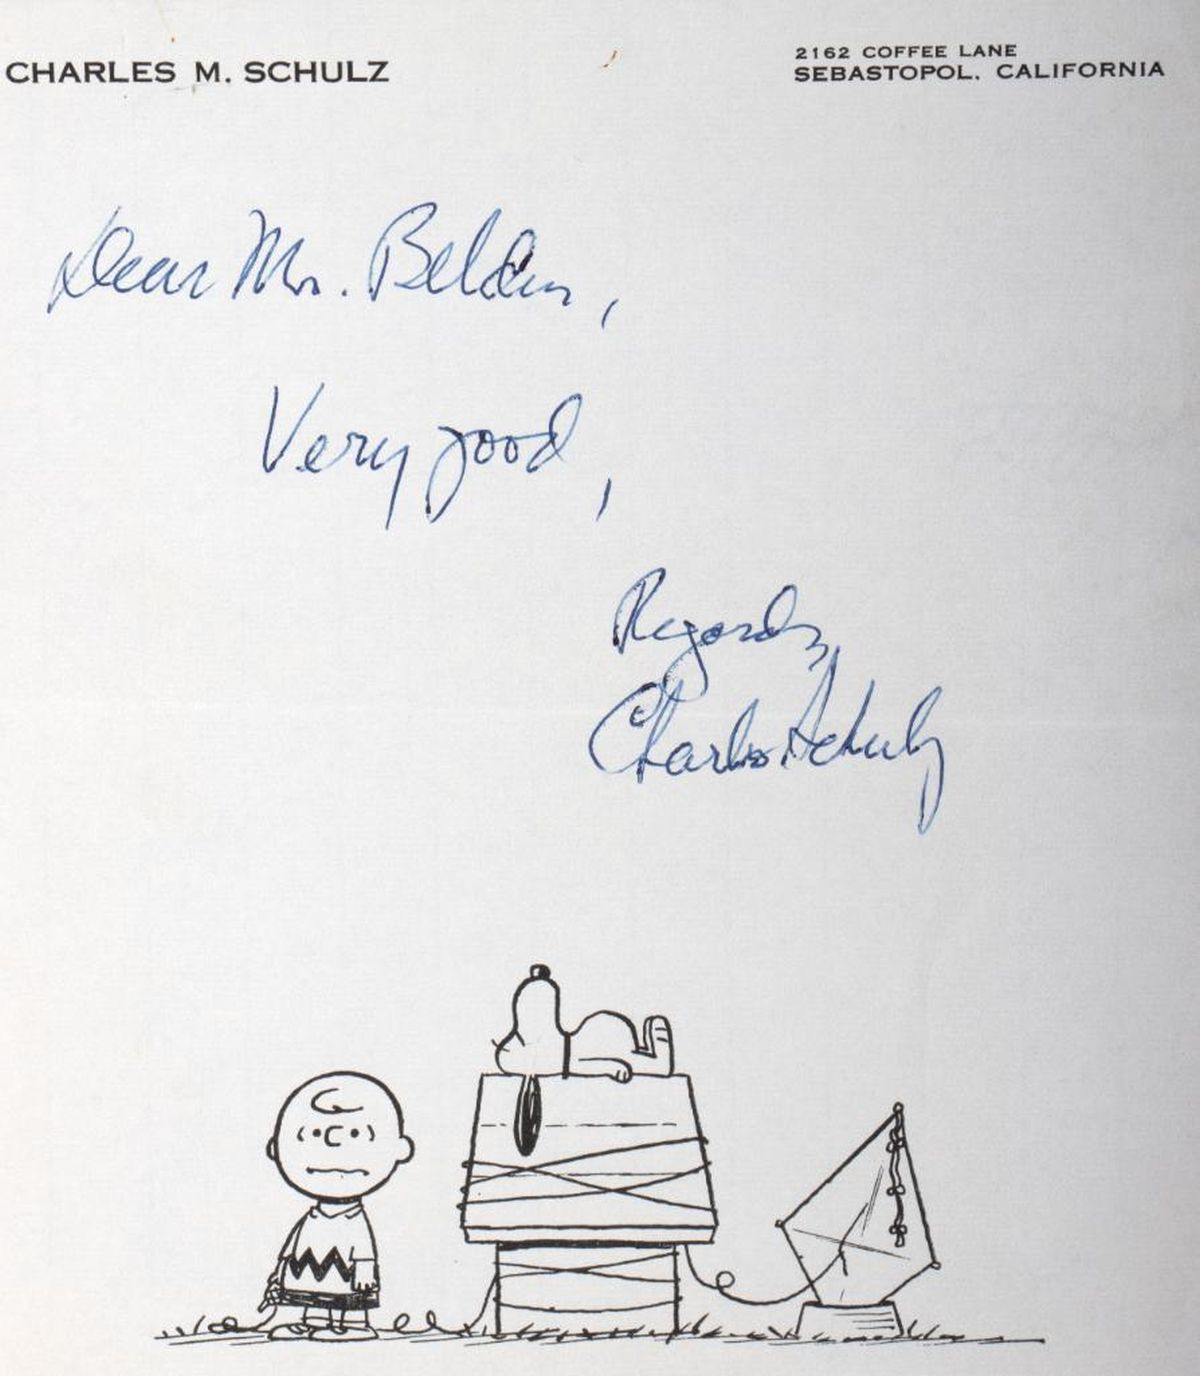 Charles M. Schulz Autographed Letter - Image 4 of 5